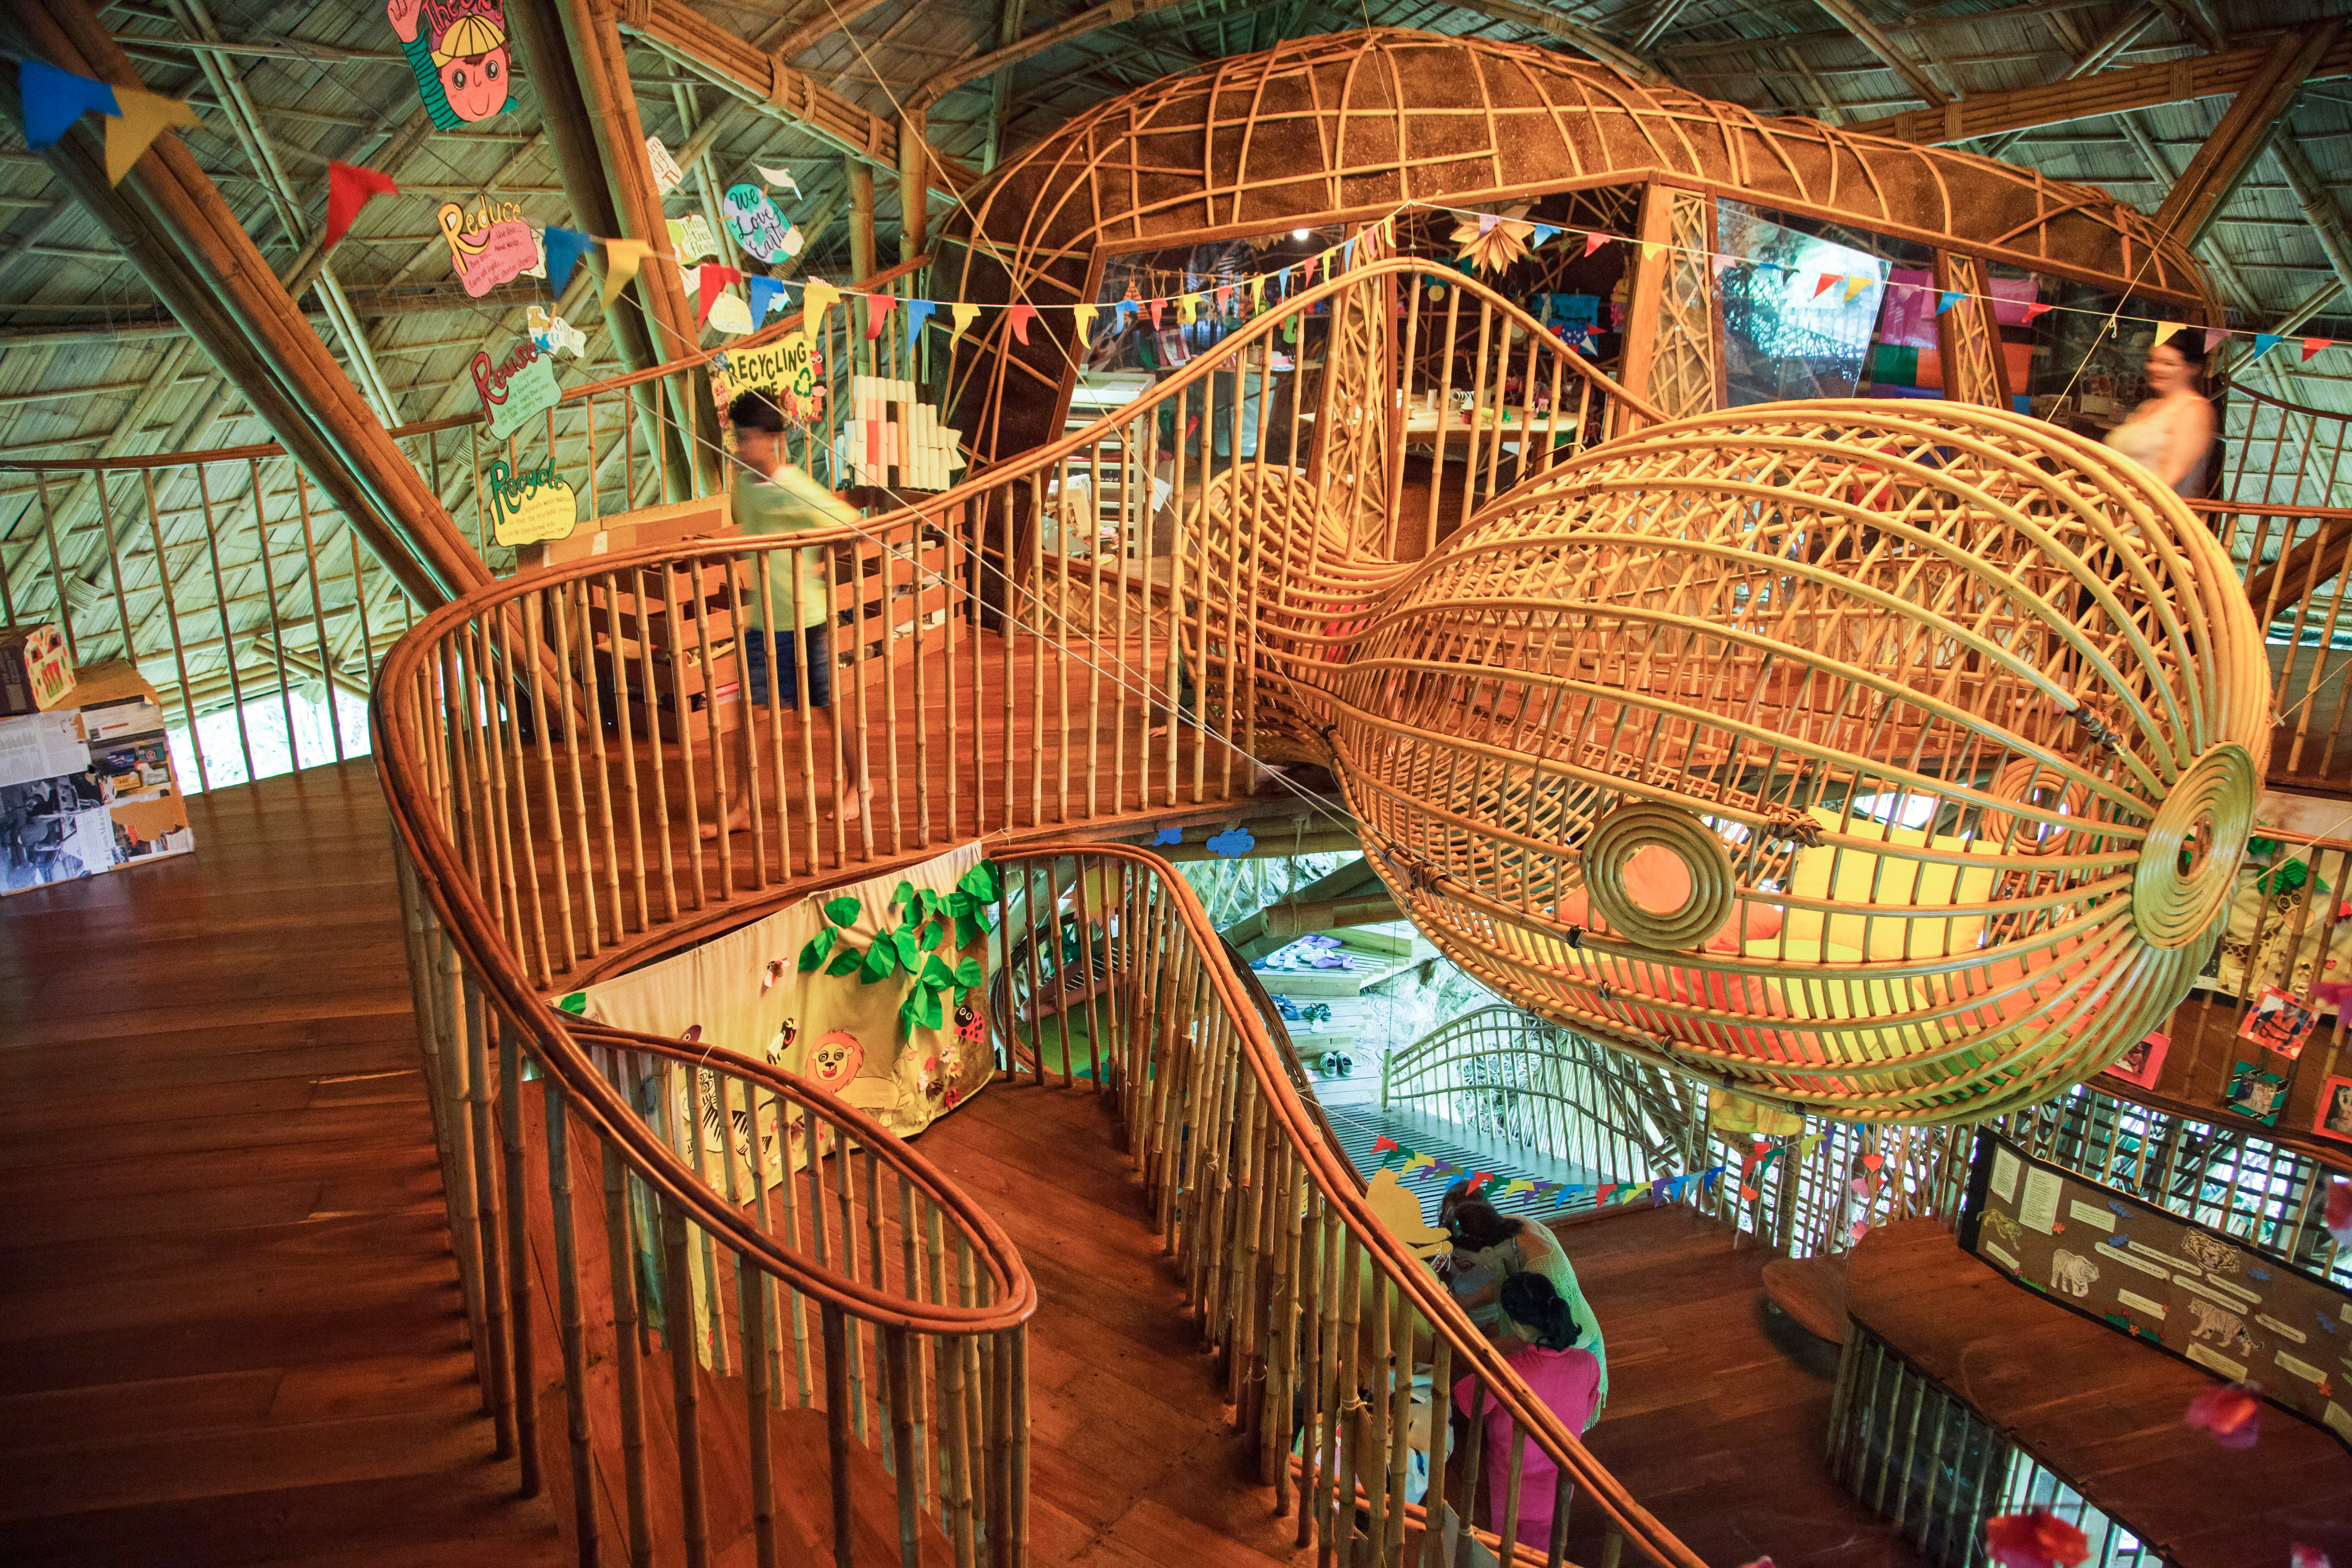 A bamboo structure is fashioned in the shape of a mantra ray; a boy is playing on a platform next to it. Winding stairs lead to the floor below.